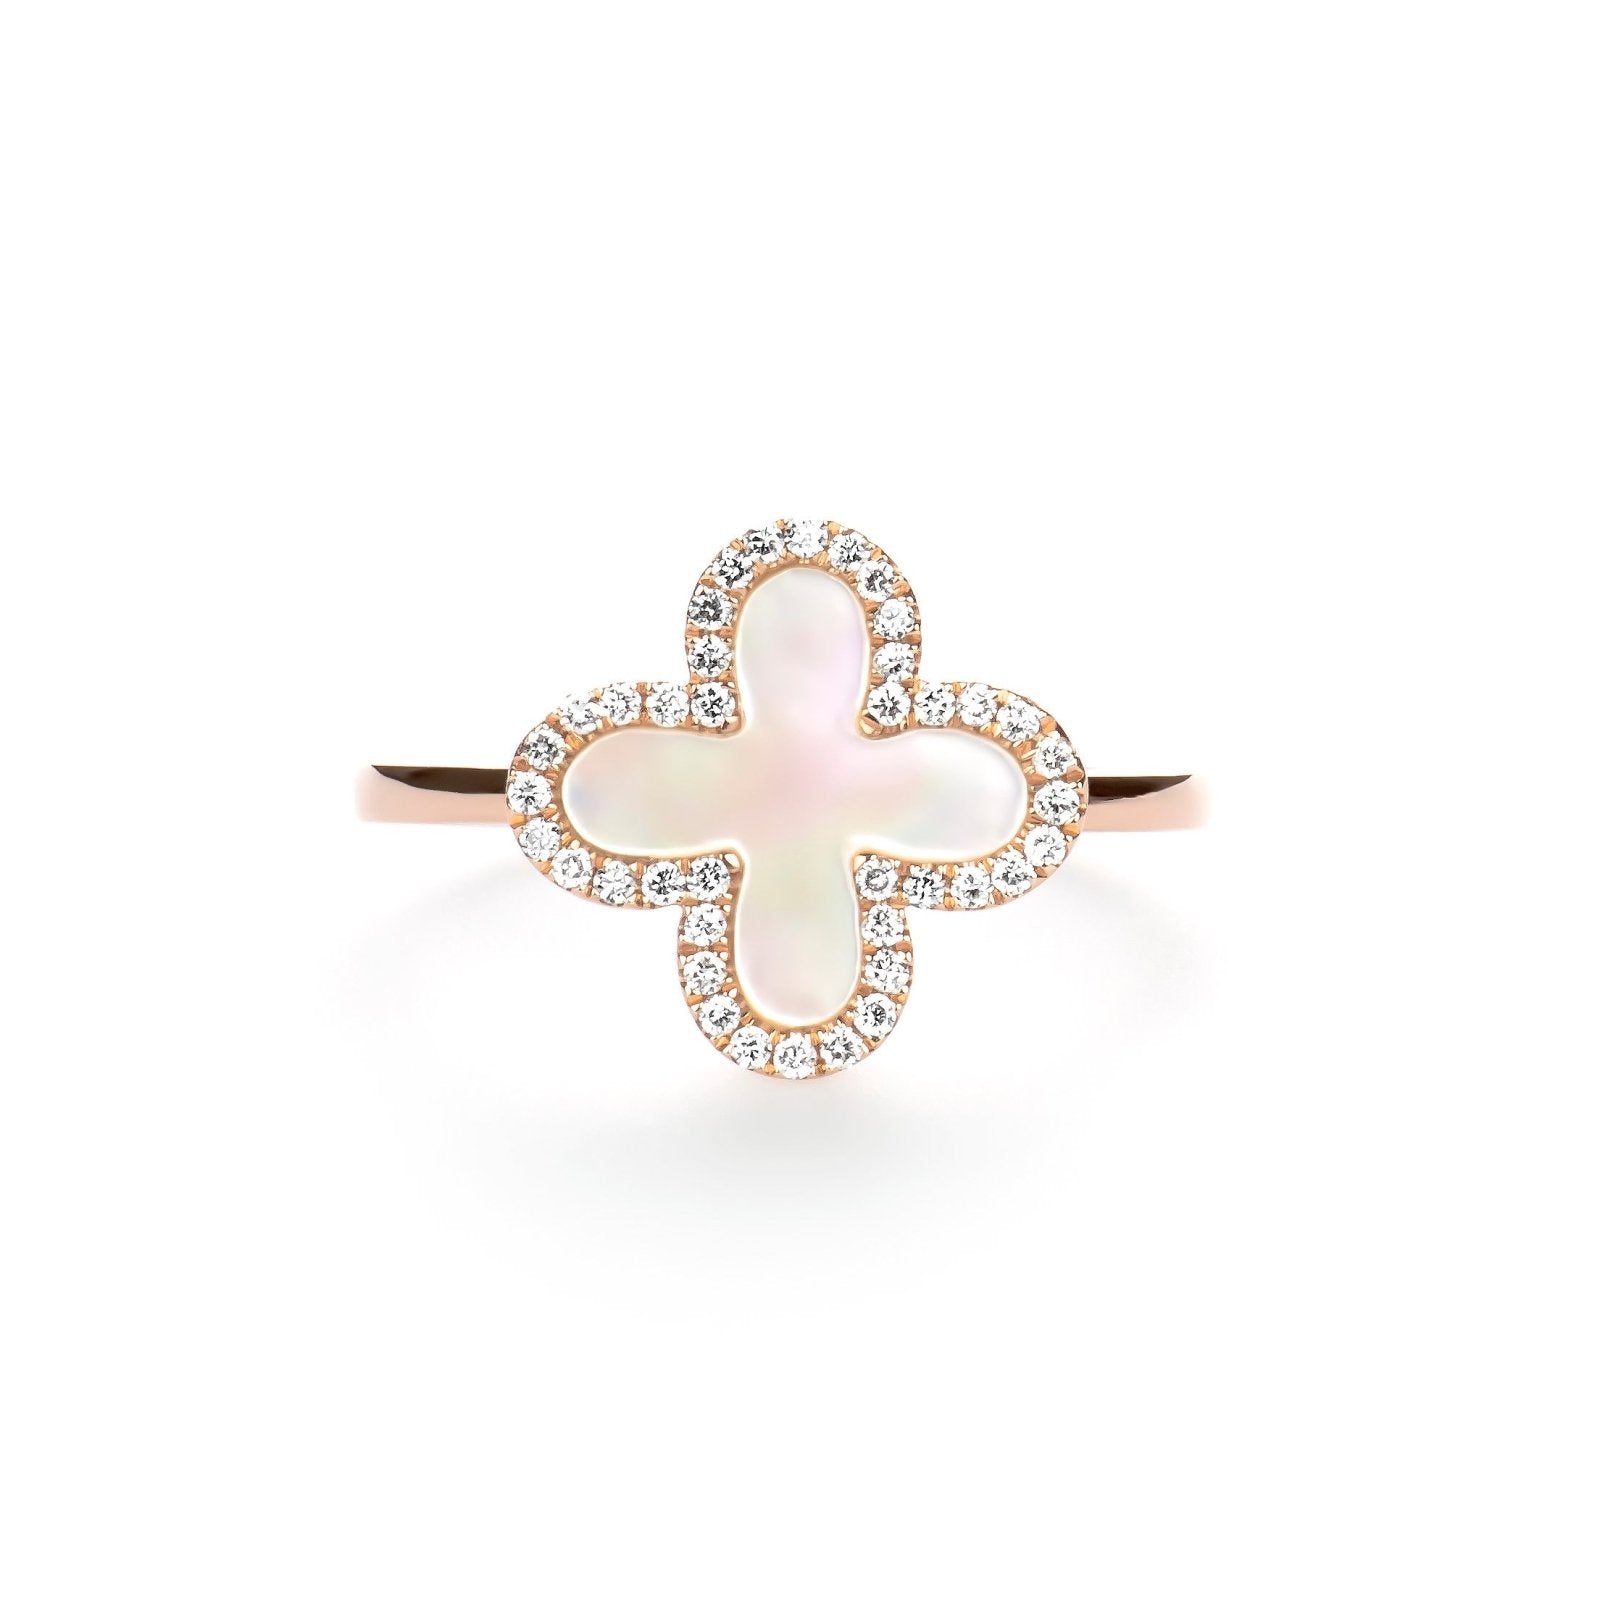 Mother of Pearl Clover with Diamond Halo Ring Rings Estella Collection #product_description# 17203 14k Birthstone Diamond #tag4# #tag5# #tag6# #tag7# #tag8# #tag9# #tag10# 6